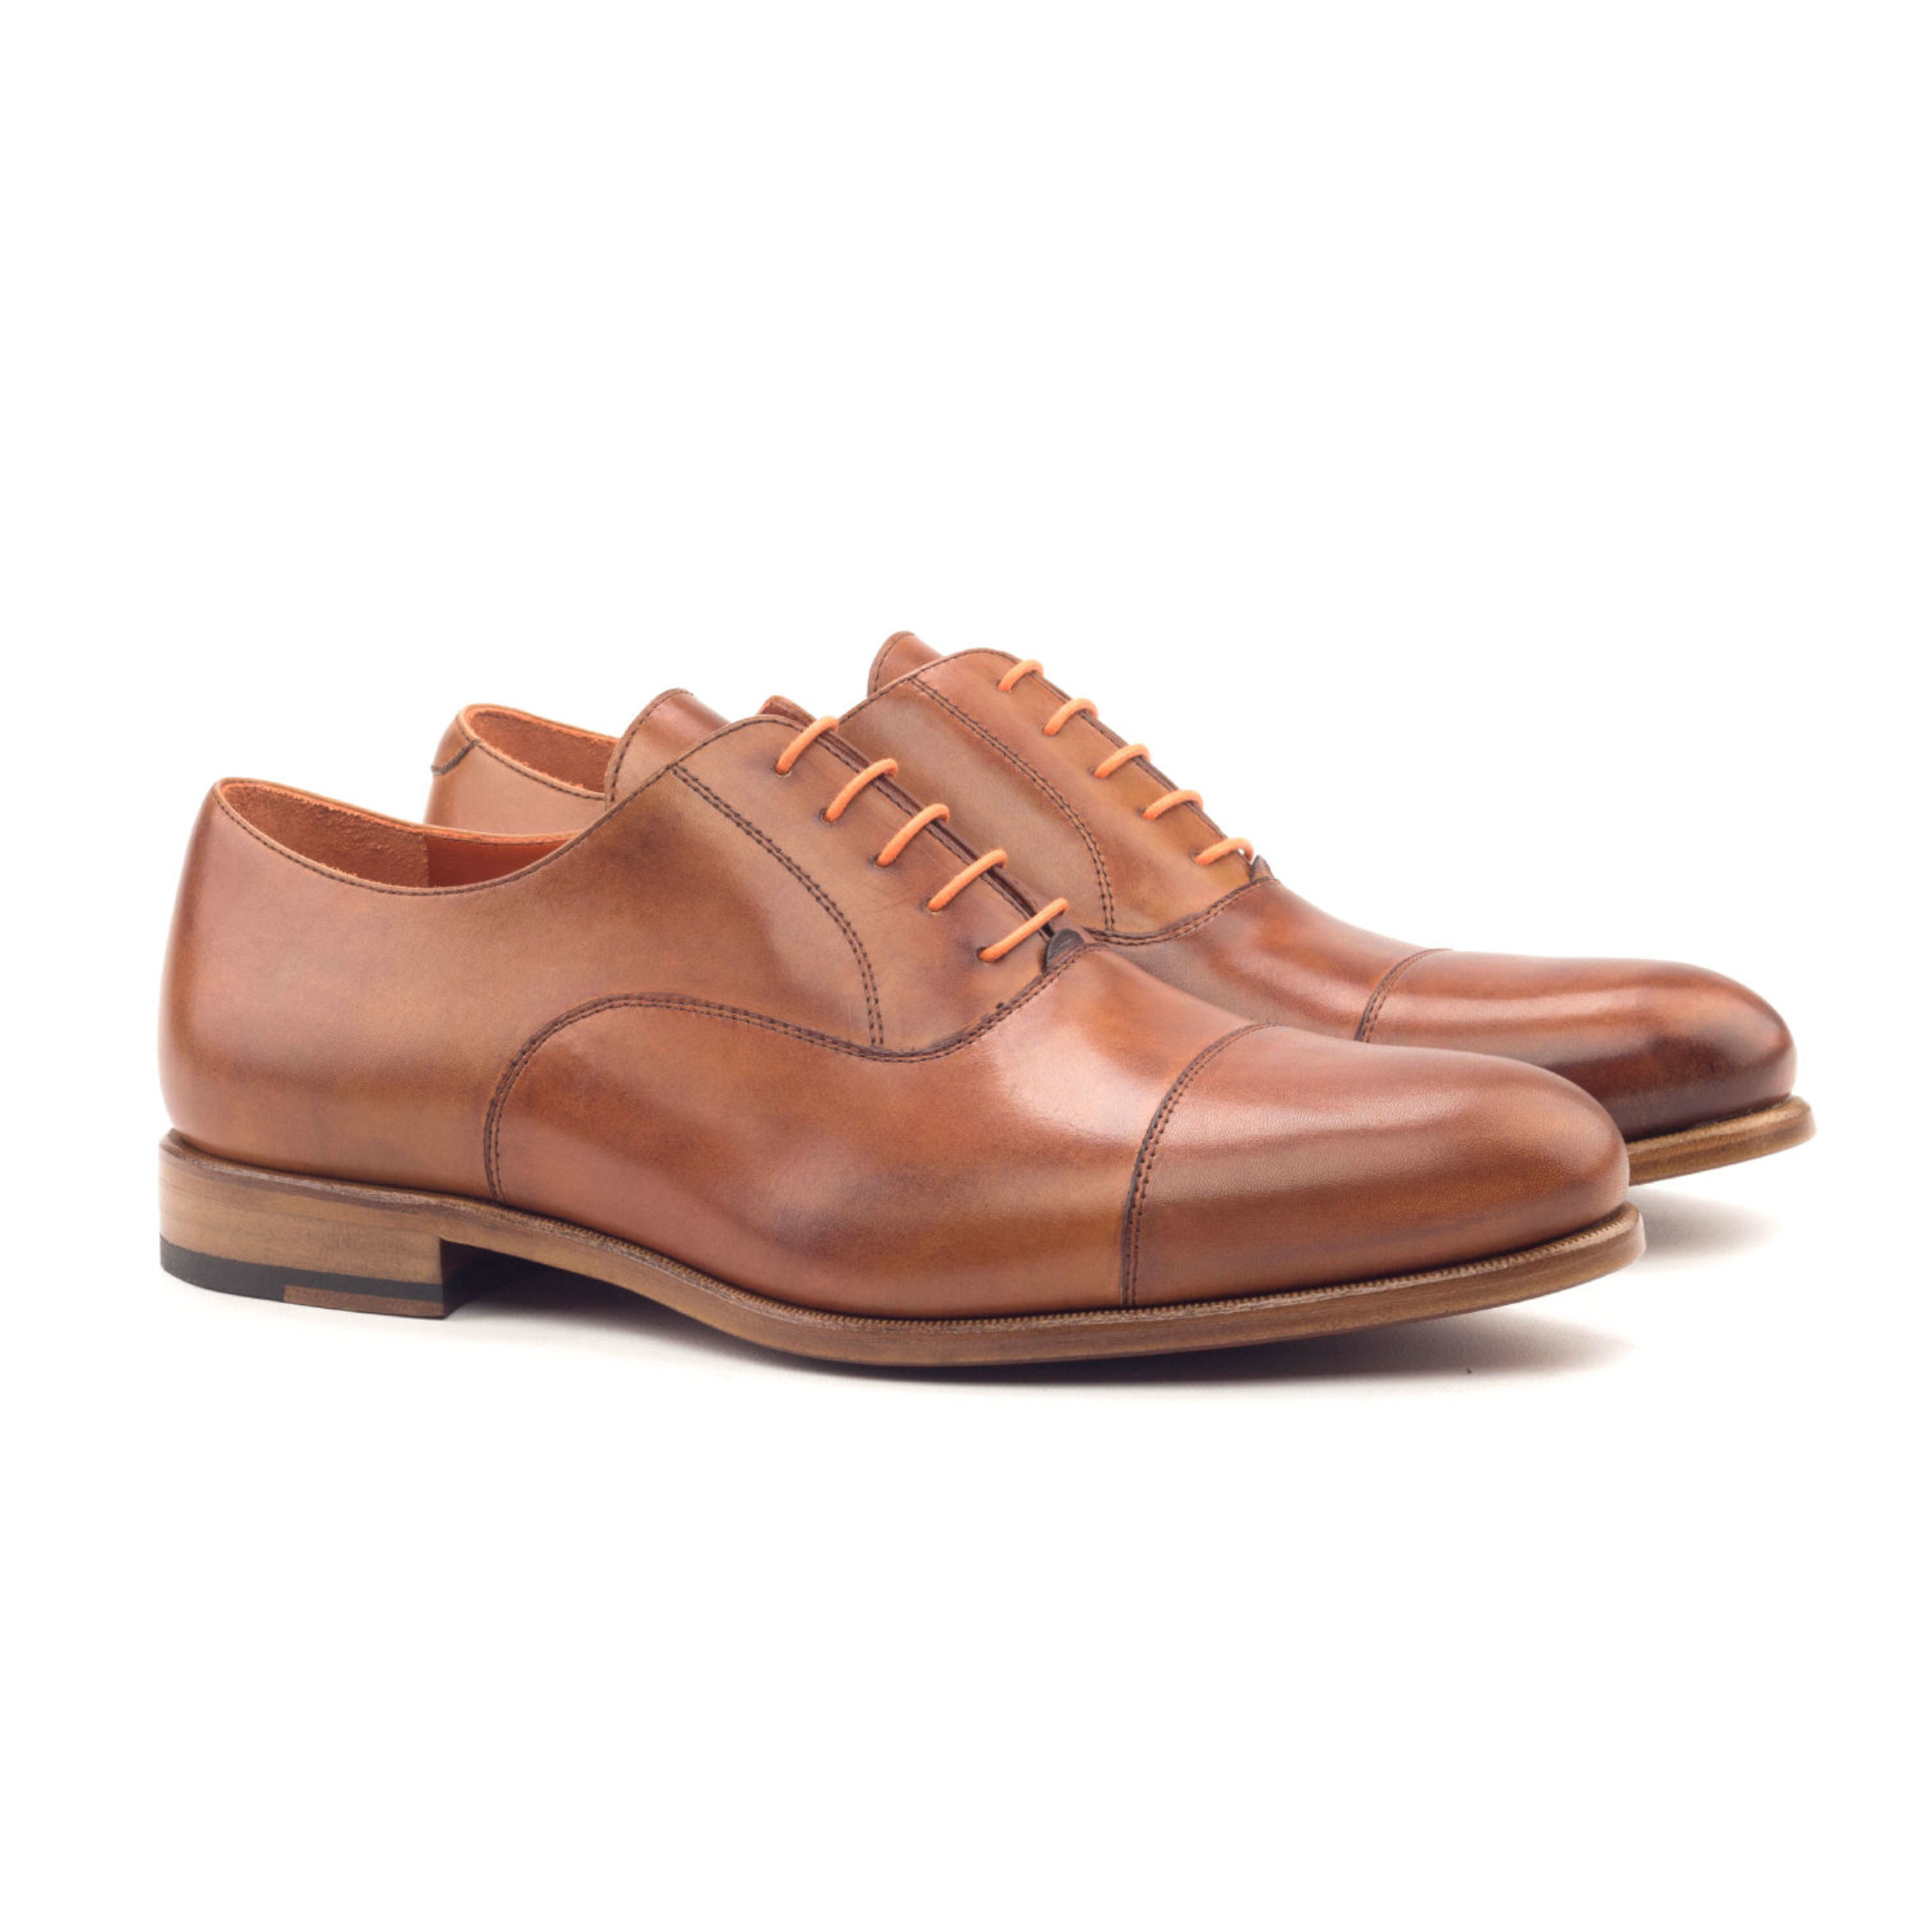 The Durham: Cognac. Oxfords in painted calf leather, cognac colored.